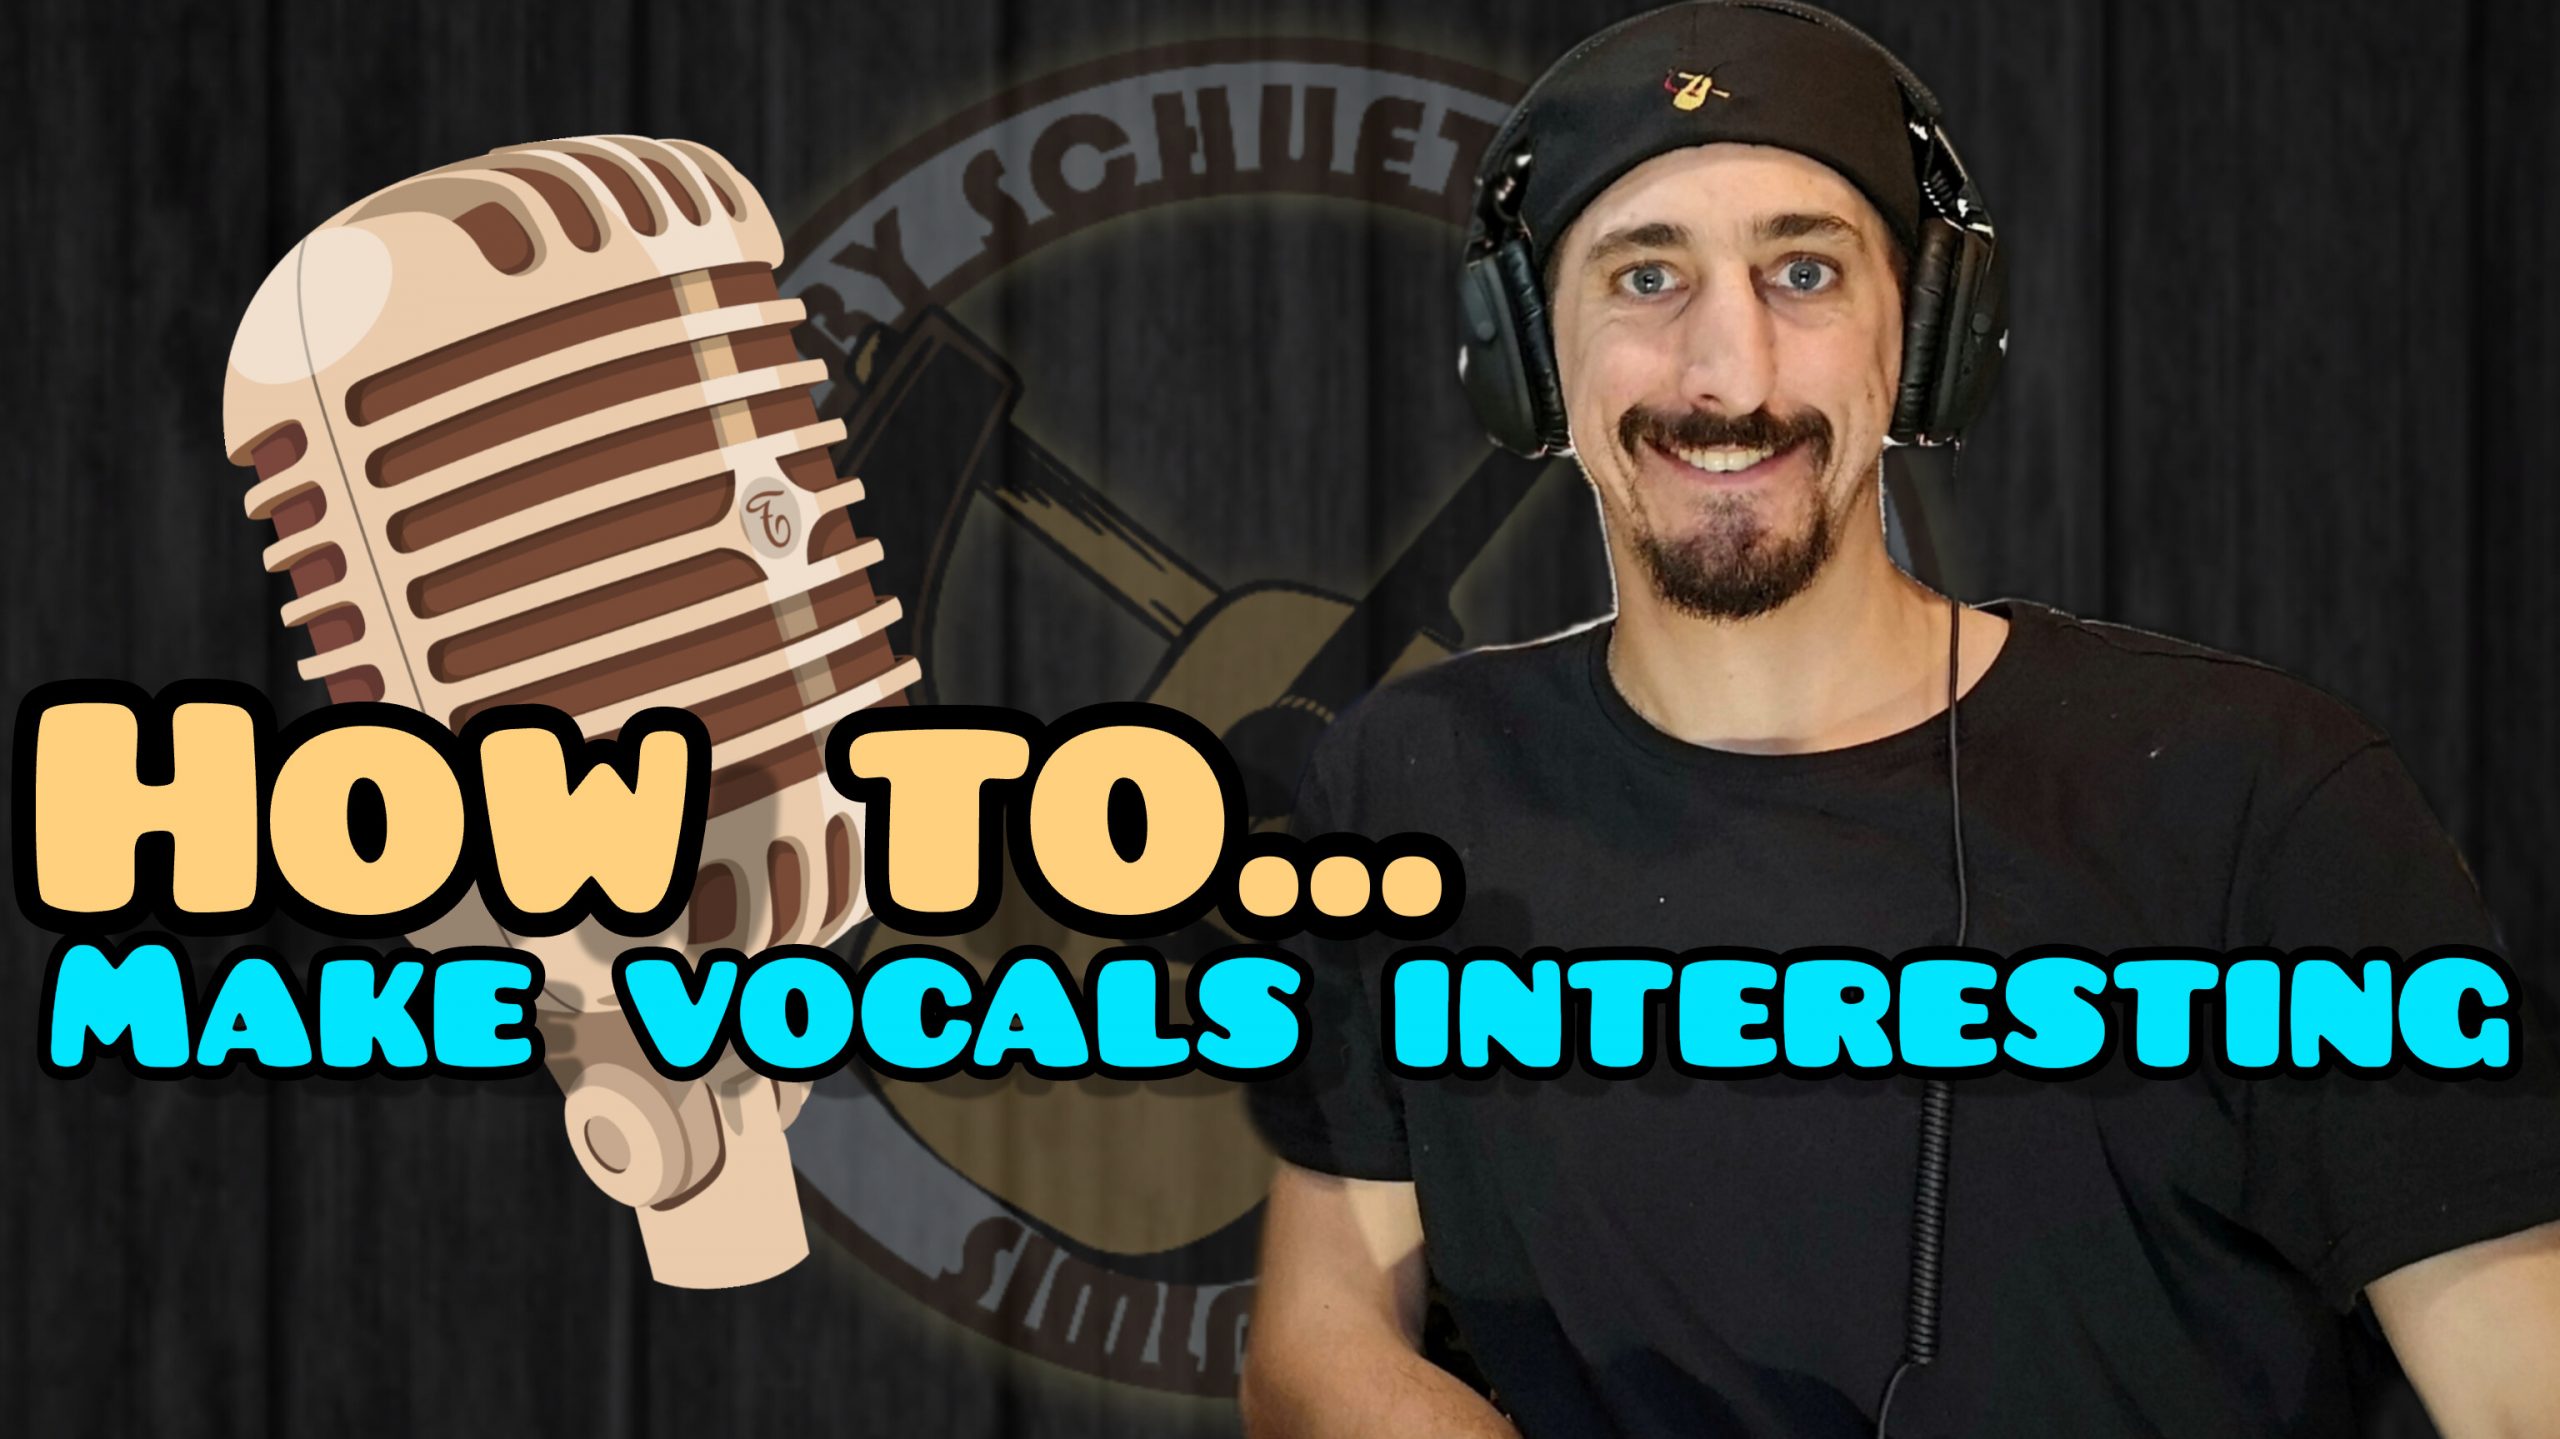 How to make vocals interesting through adding effects like reverbs and delays